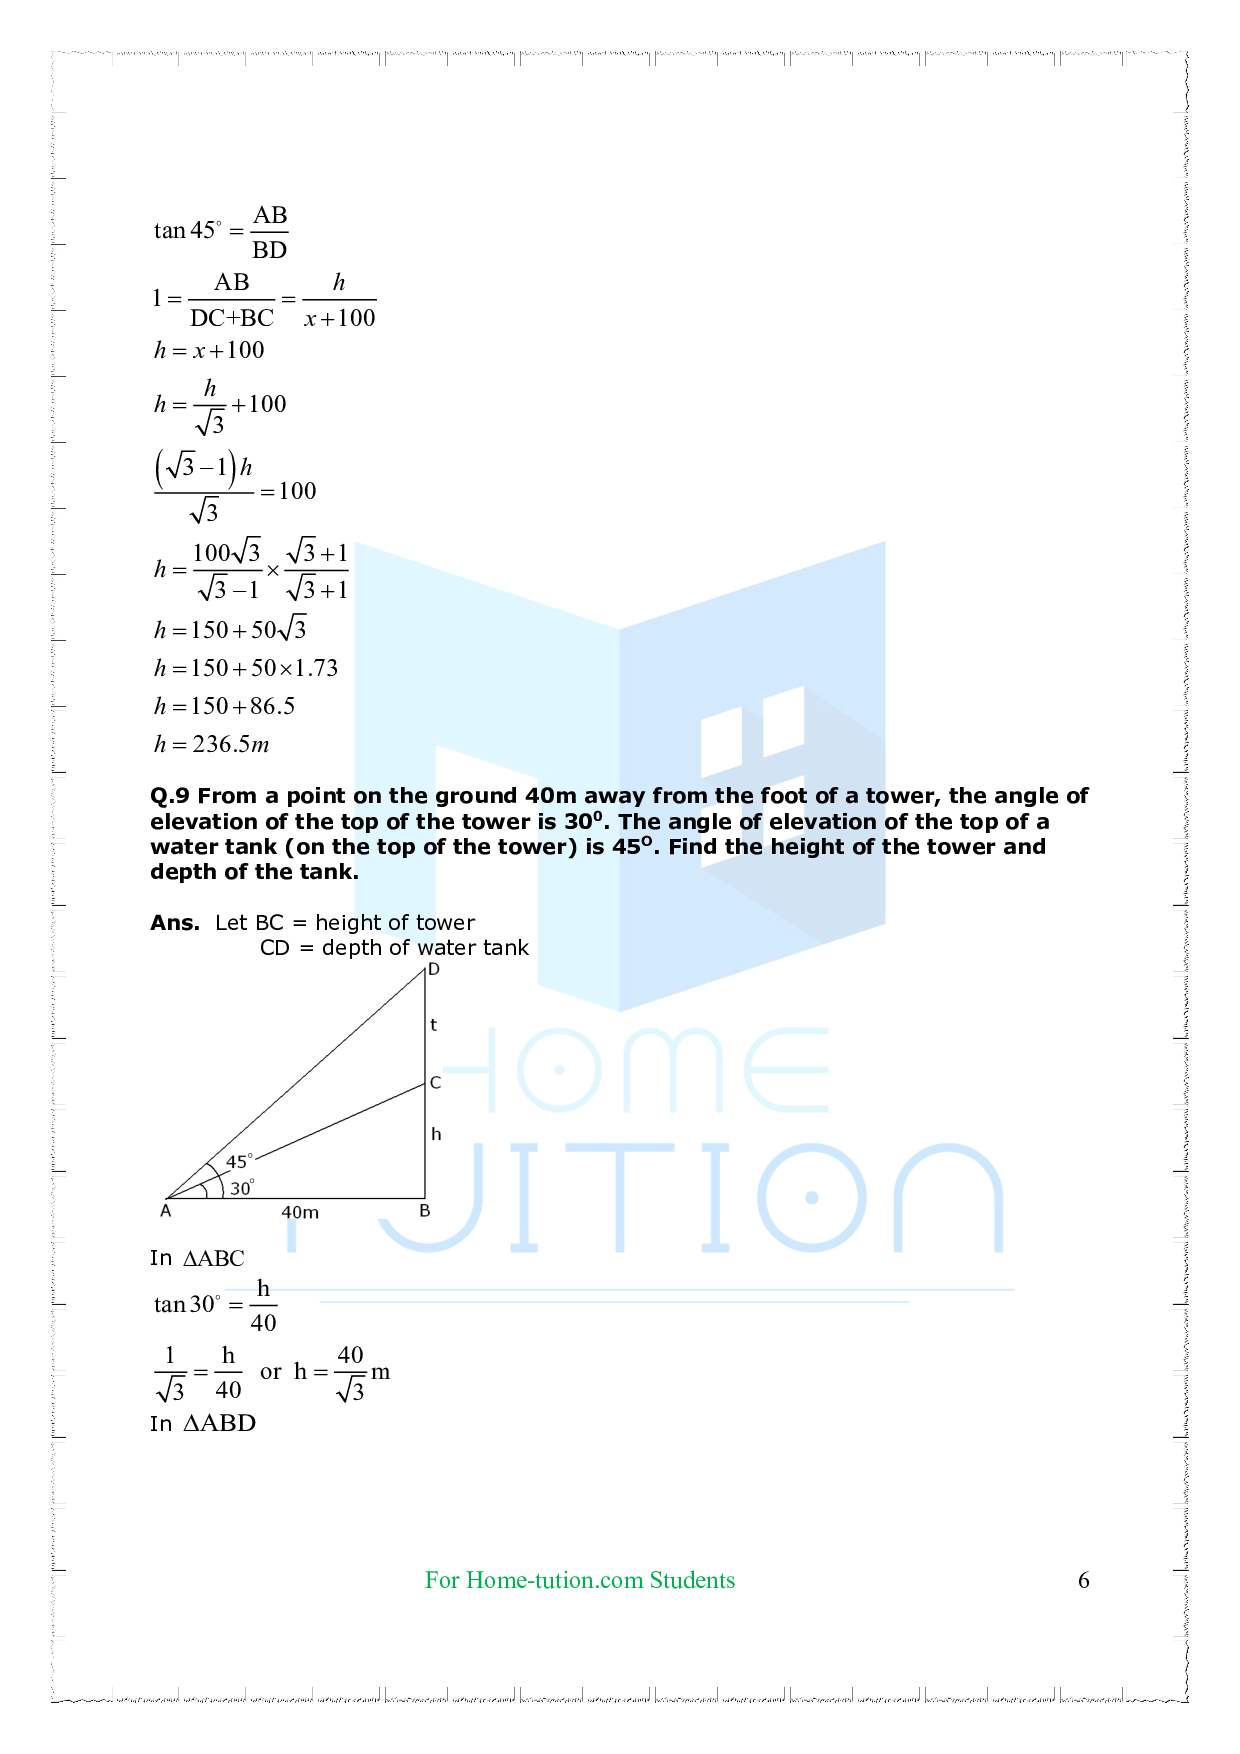 Chapter-9 Some Applications of Trigonometry Questions